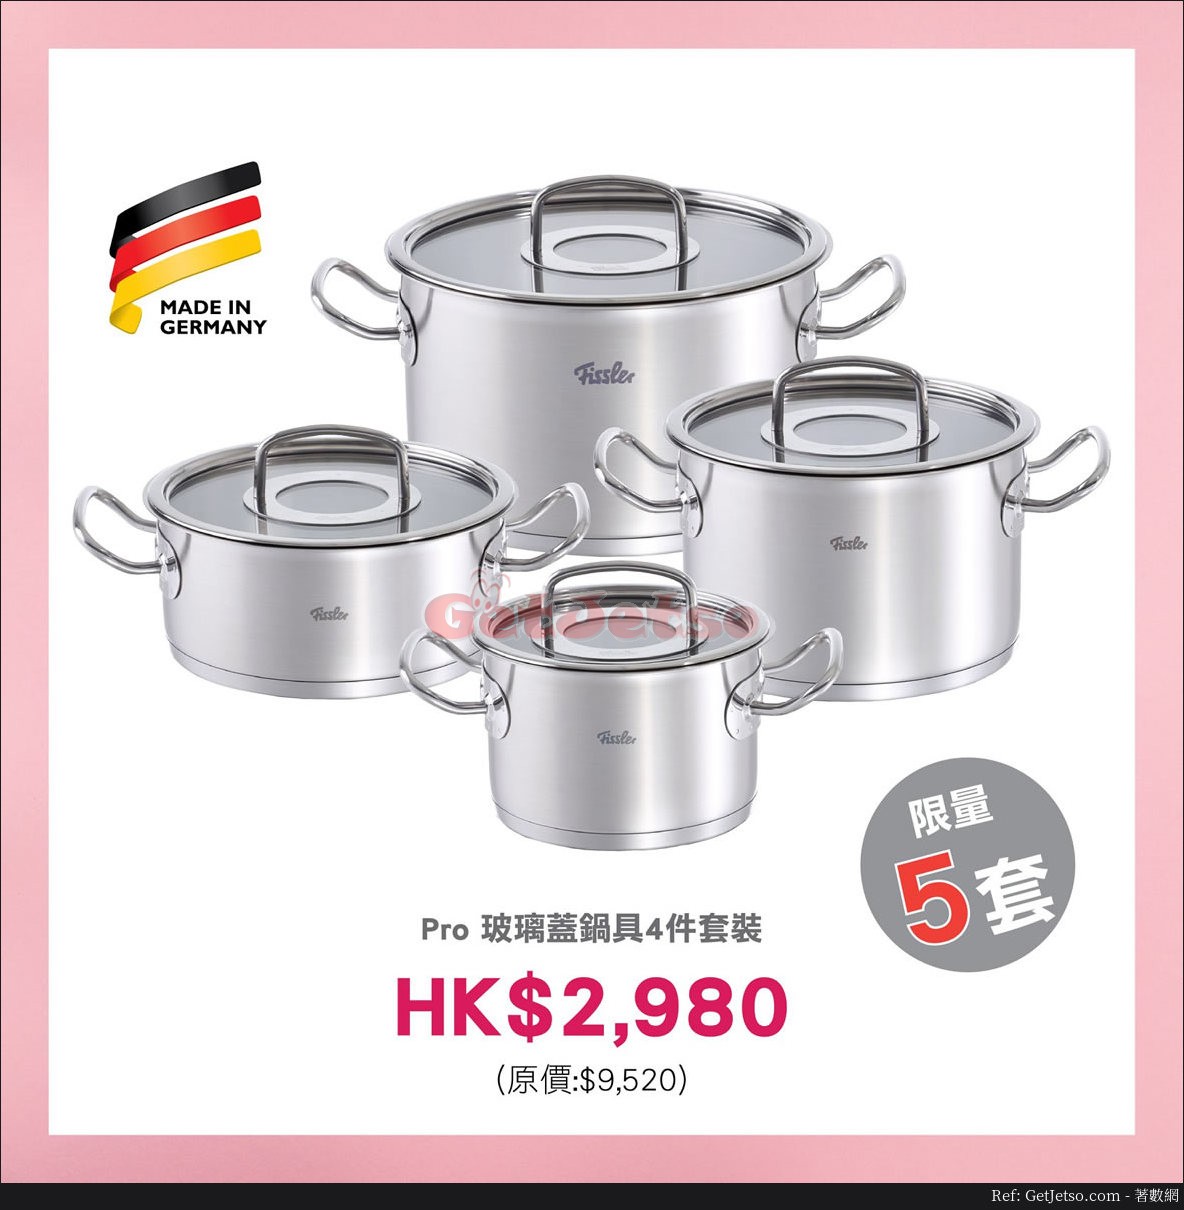 Fissler x Cook town 低至3折Private sale 優惠(18年2月1-3日)圖片2